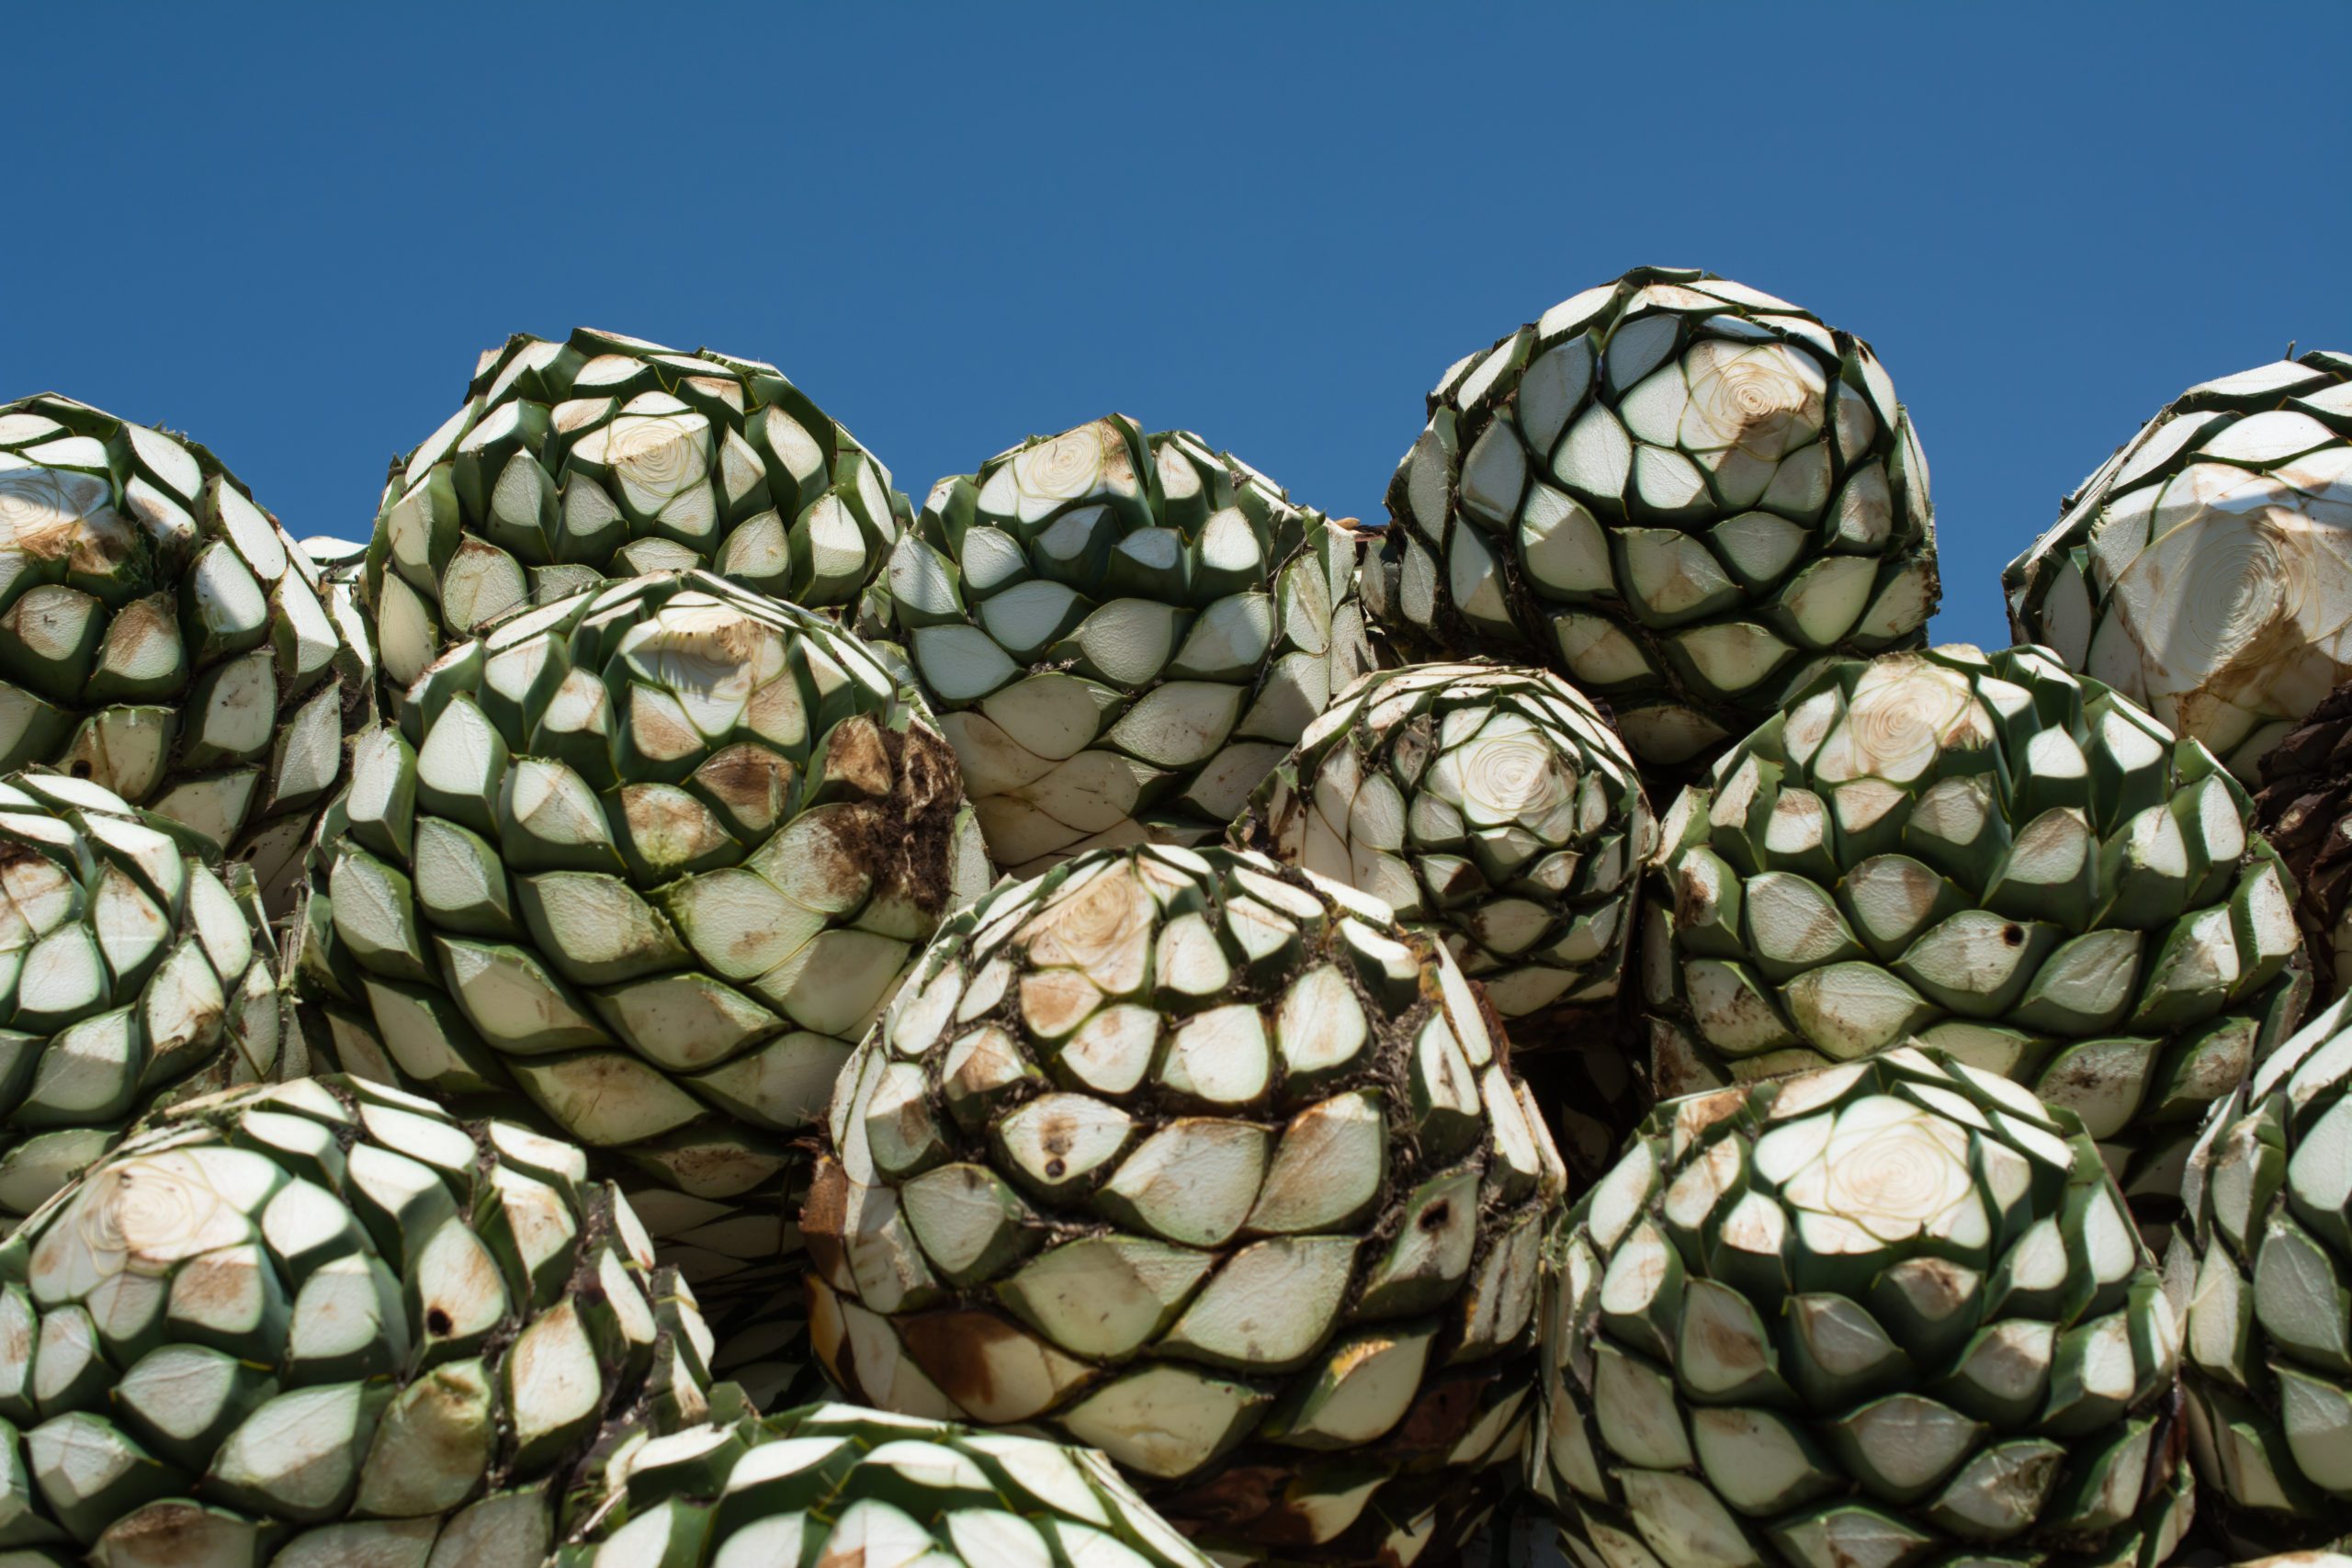 Blue agave plants in Mexico (Photo courtesy of Canción Tequila)